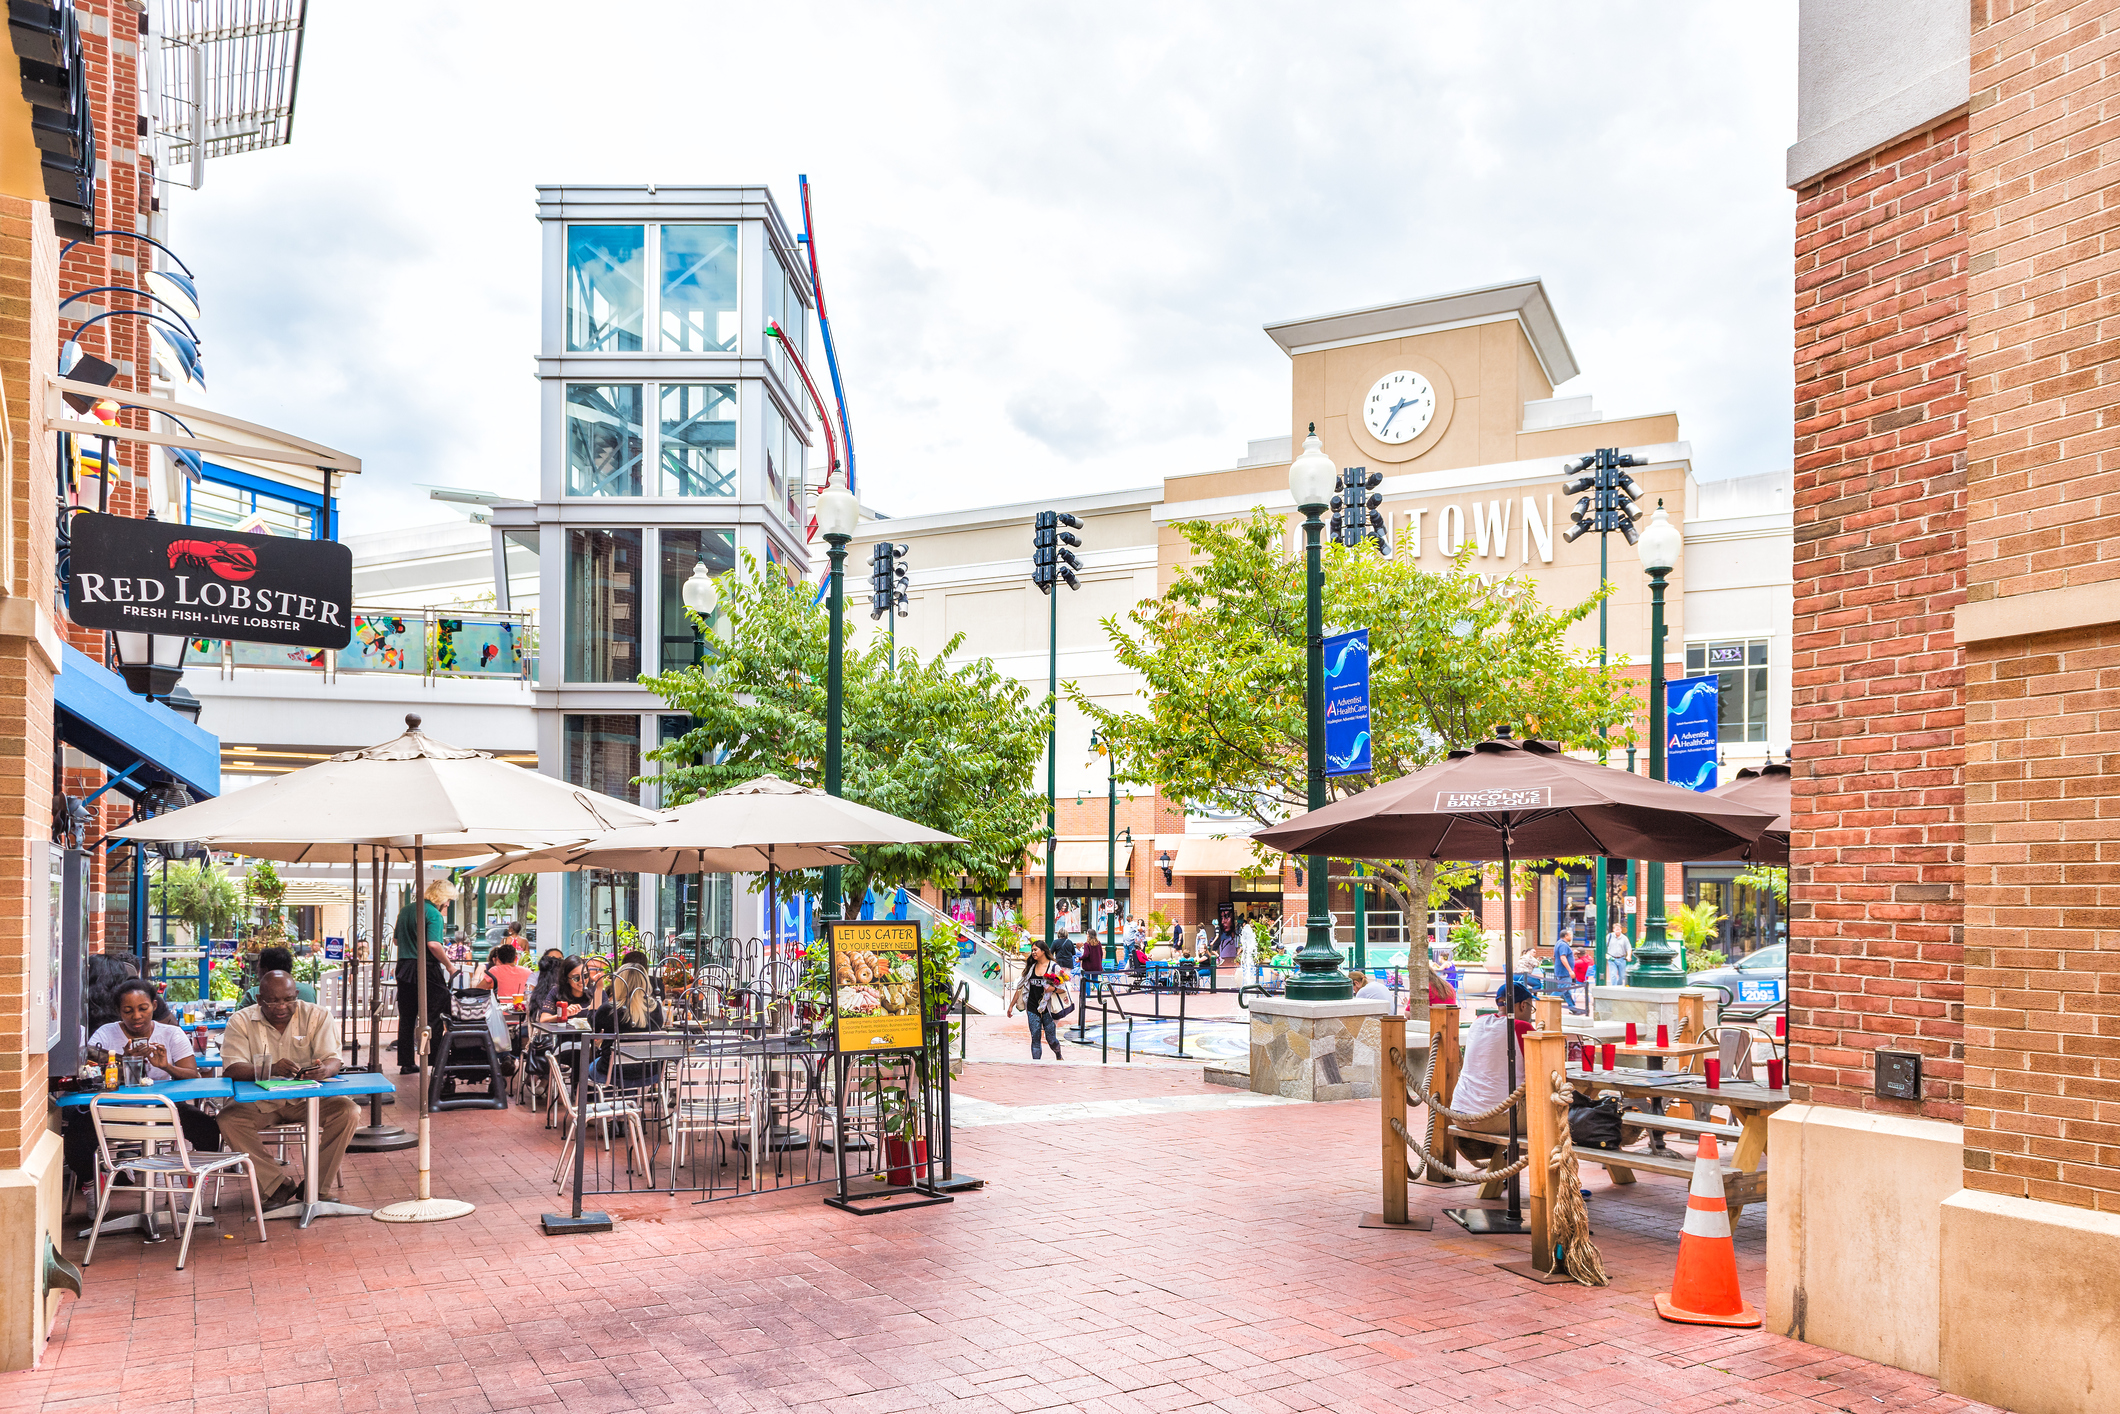 Downtown area of city in Maryland with shopping mall, restaurants and shops